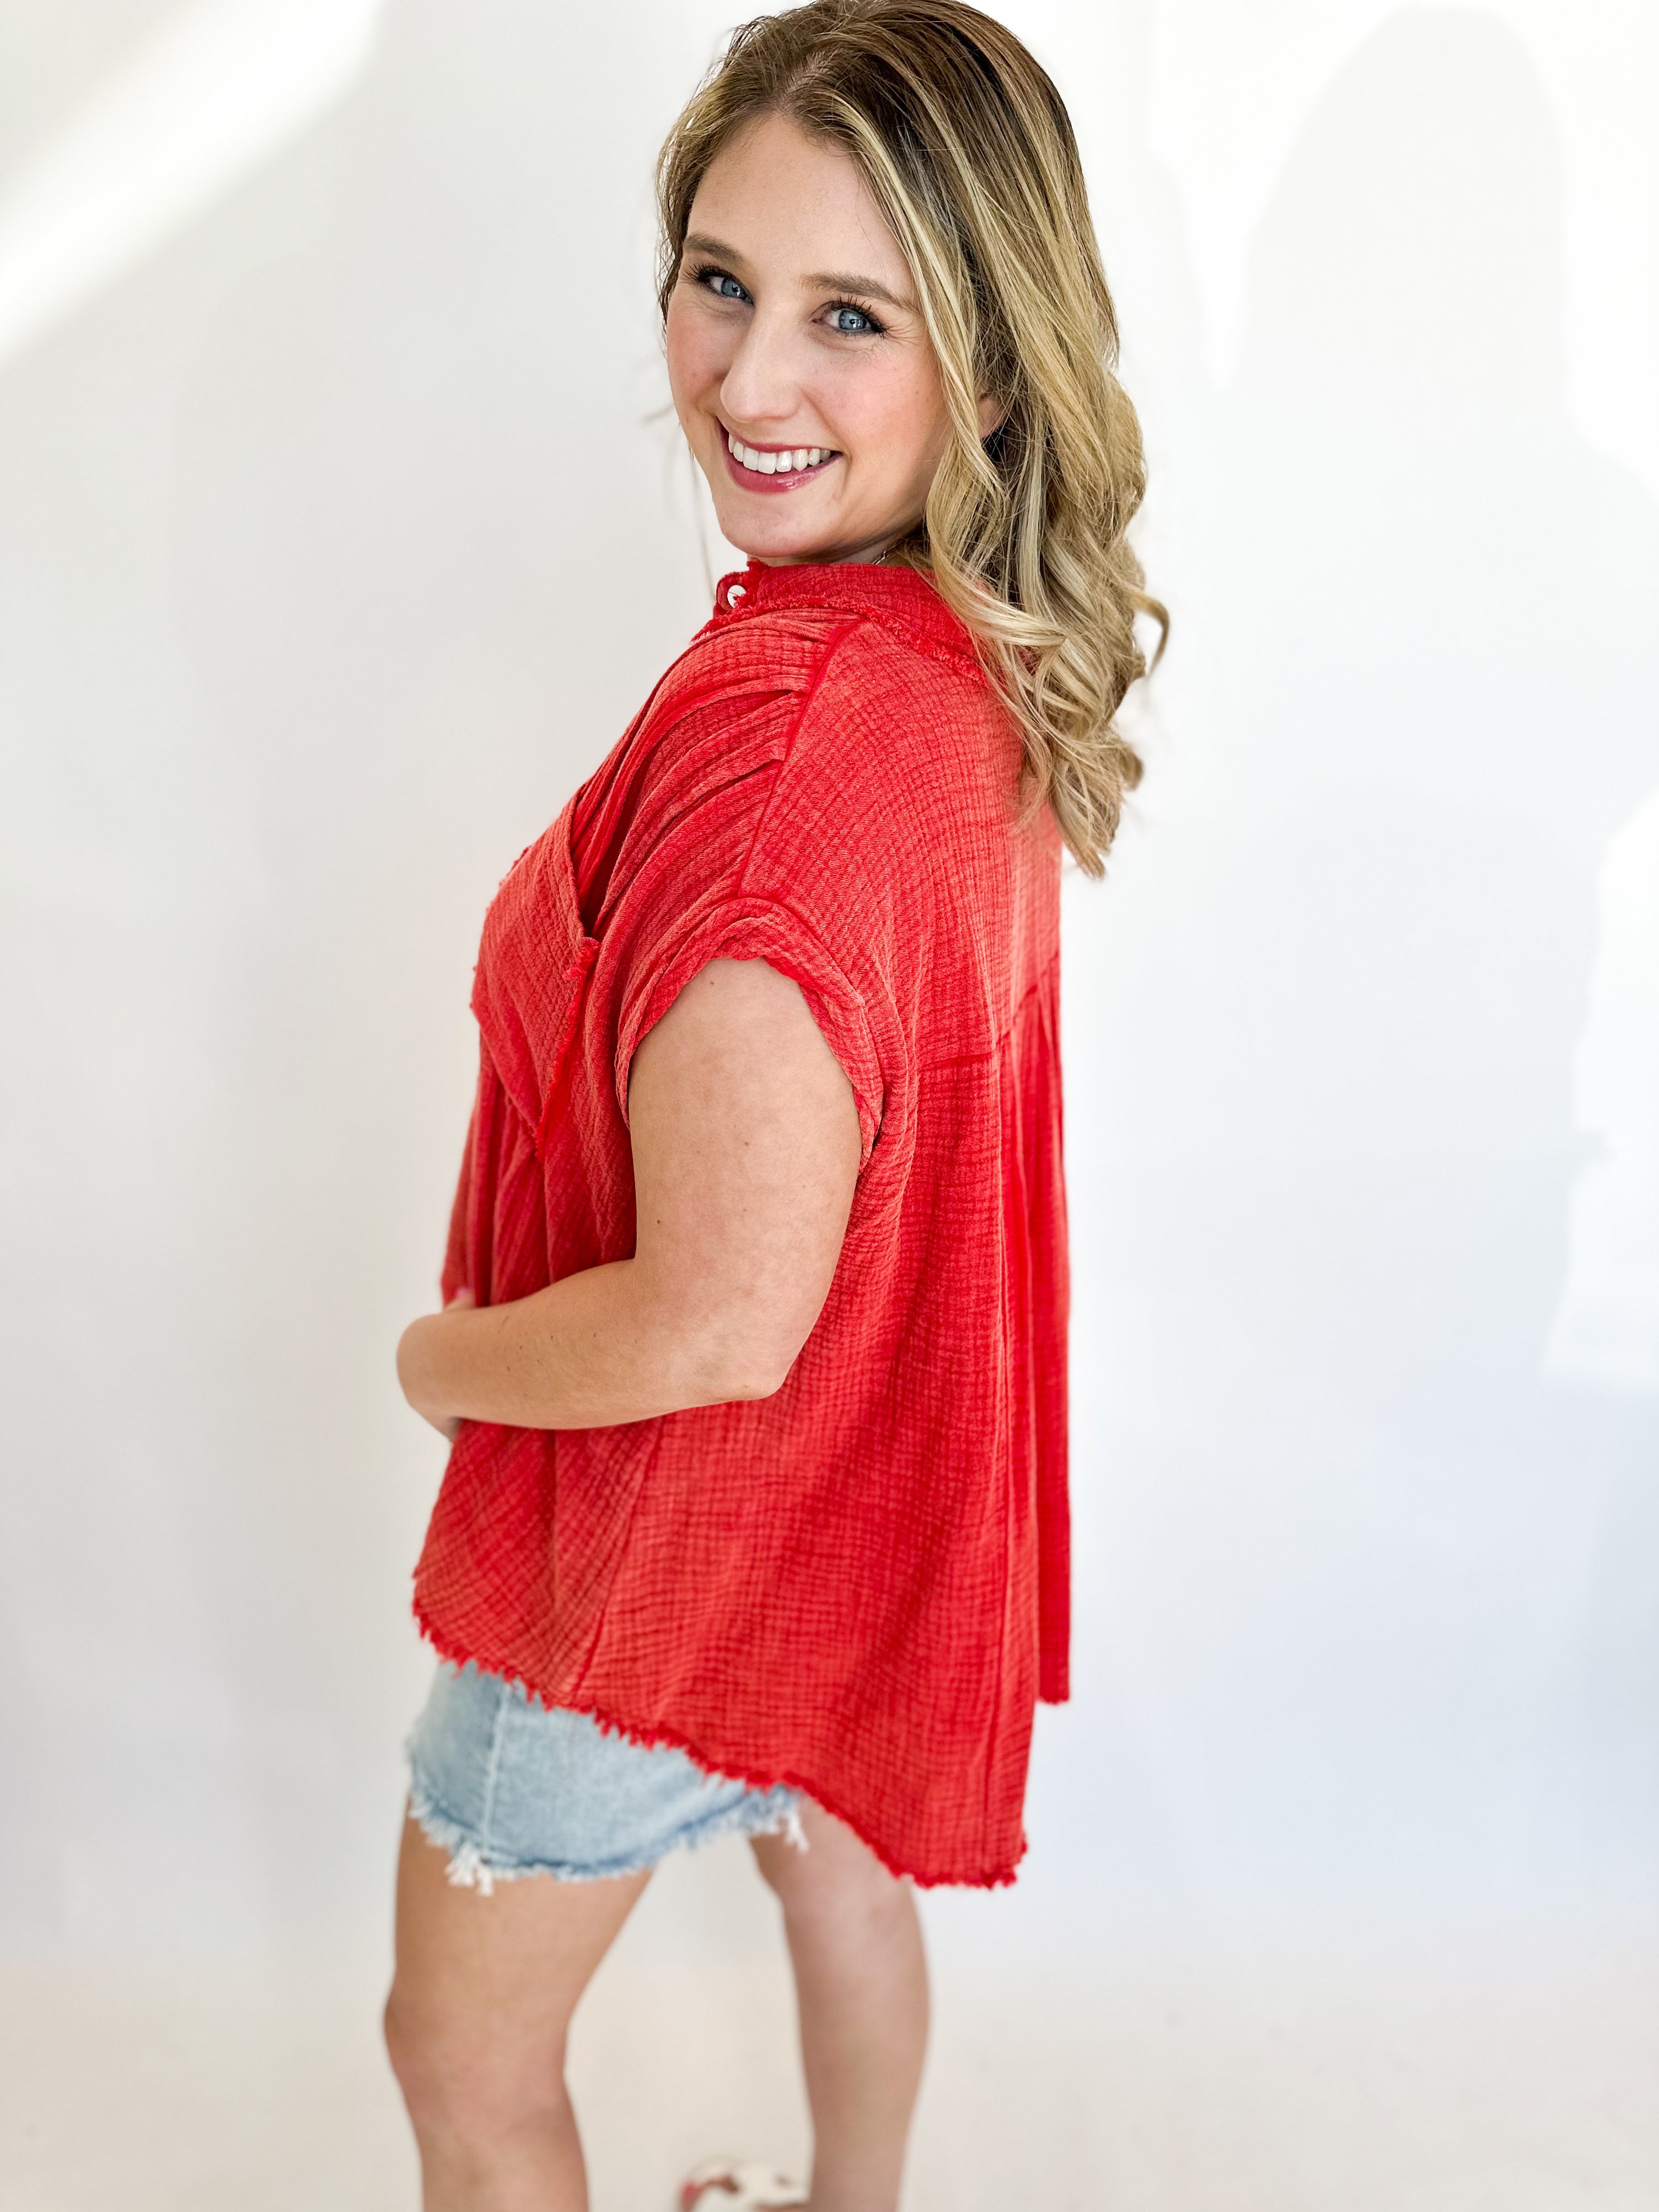 Cherry Red Henley Blouse-200 Fashion Blouses-FANTASTIC FAWN-July & June Women's Fashion Boutique Located in San Antonio, Texas